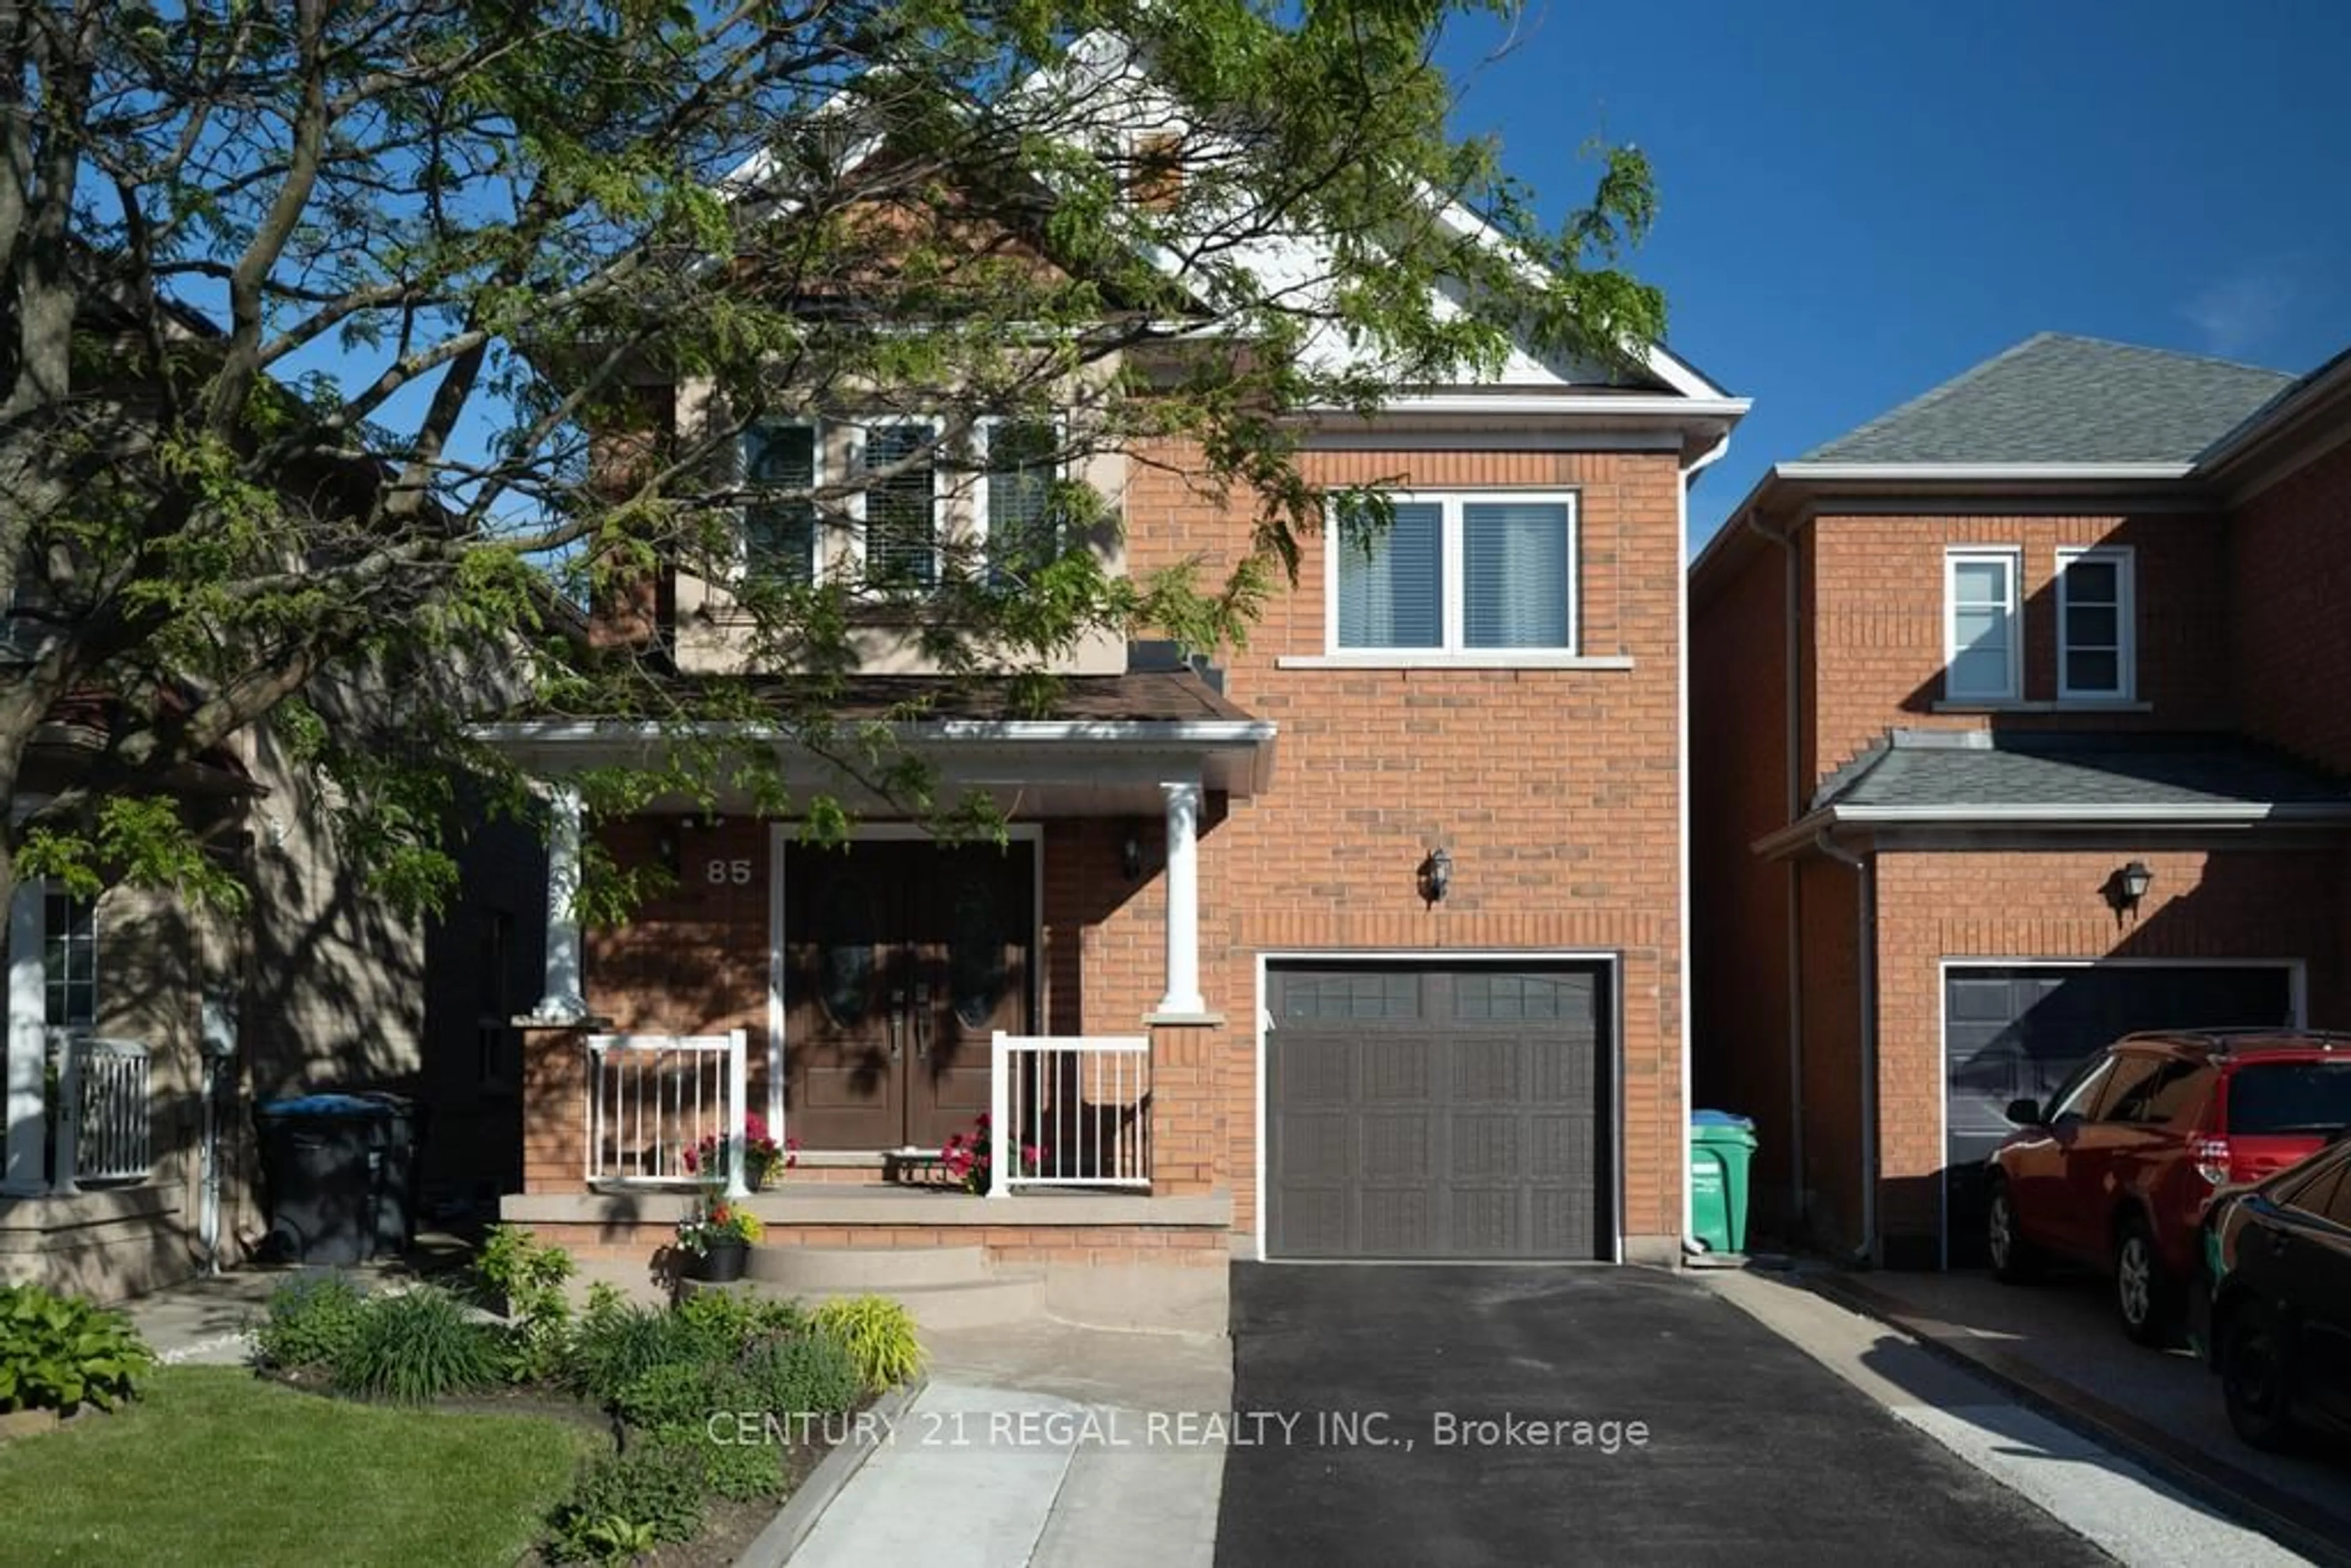 Home with brick exterior material for 85 Heartleaf Cres, Brampton Ontario L7A 2B9